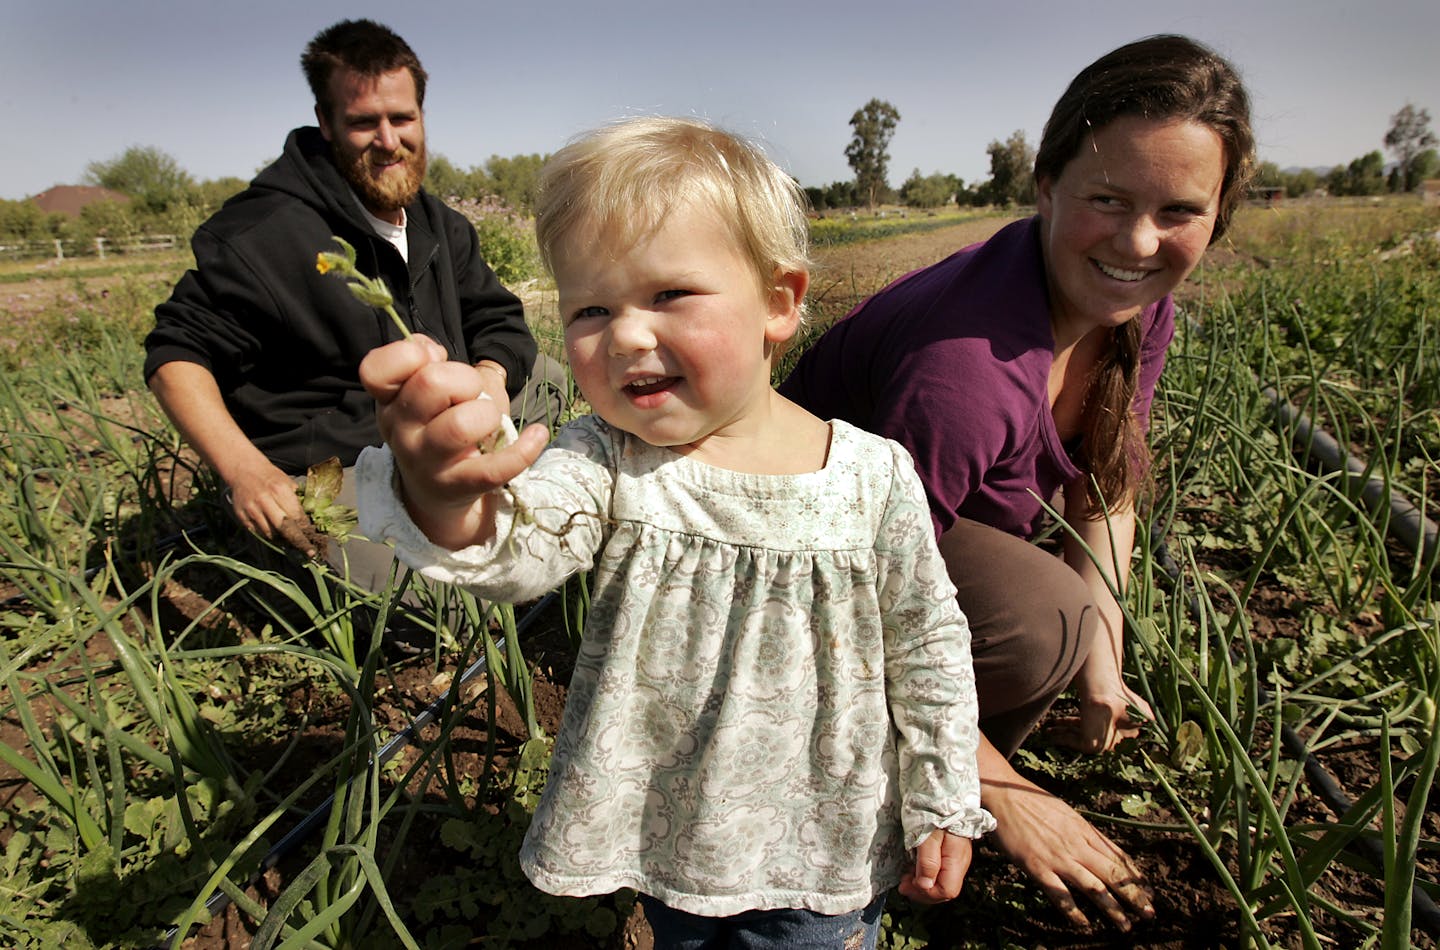 A couple and their young daughter in a farm field. The little girl holds a flower up for the camera.